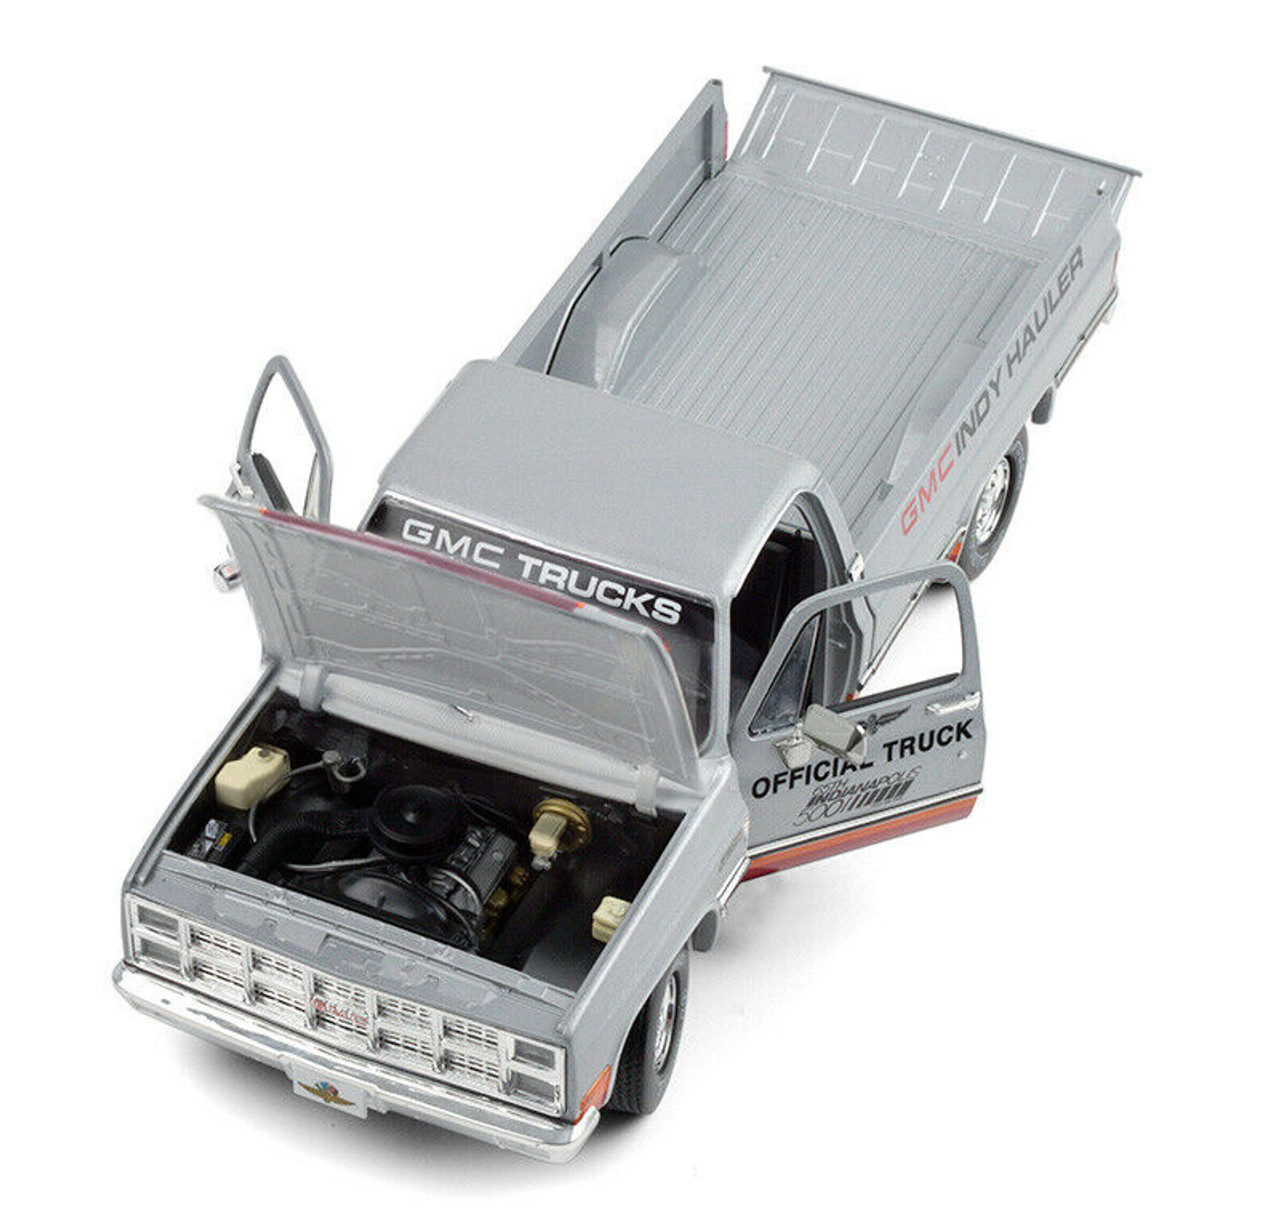 1981 GMC Sierra Classic 1500 Pickup Truck Silver with Stripes "65th Annual Indianapolis 500 Mile Race" Official Truck 1/18 Diecast Model Car by Greenlight